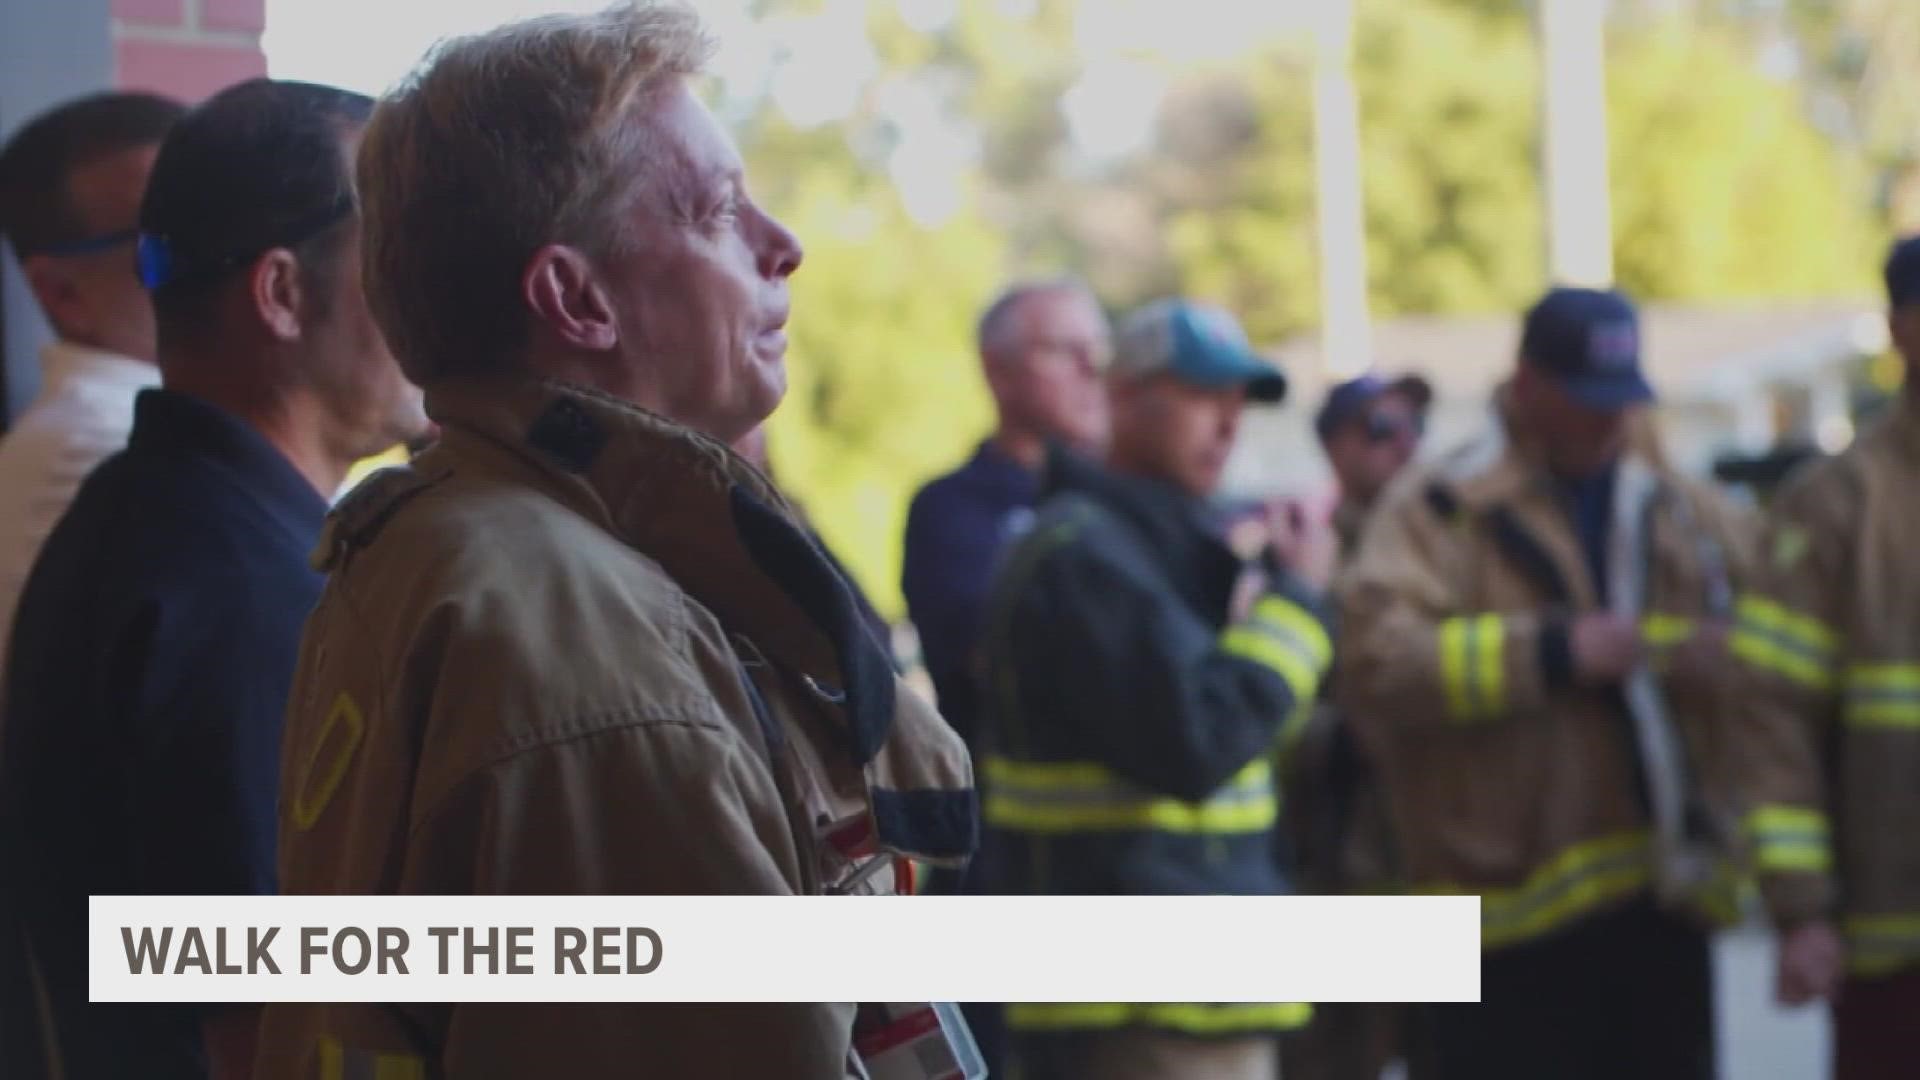 Walk for the Red began in 2019, when cancer was listed as the number one killer among firefighters. All proceeds from the walk go to firefighters and their families.